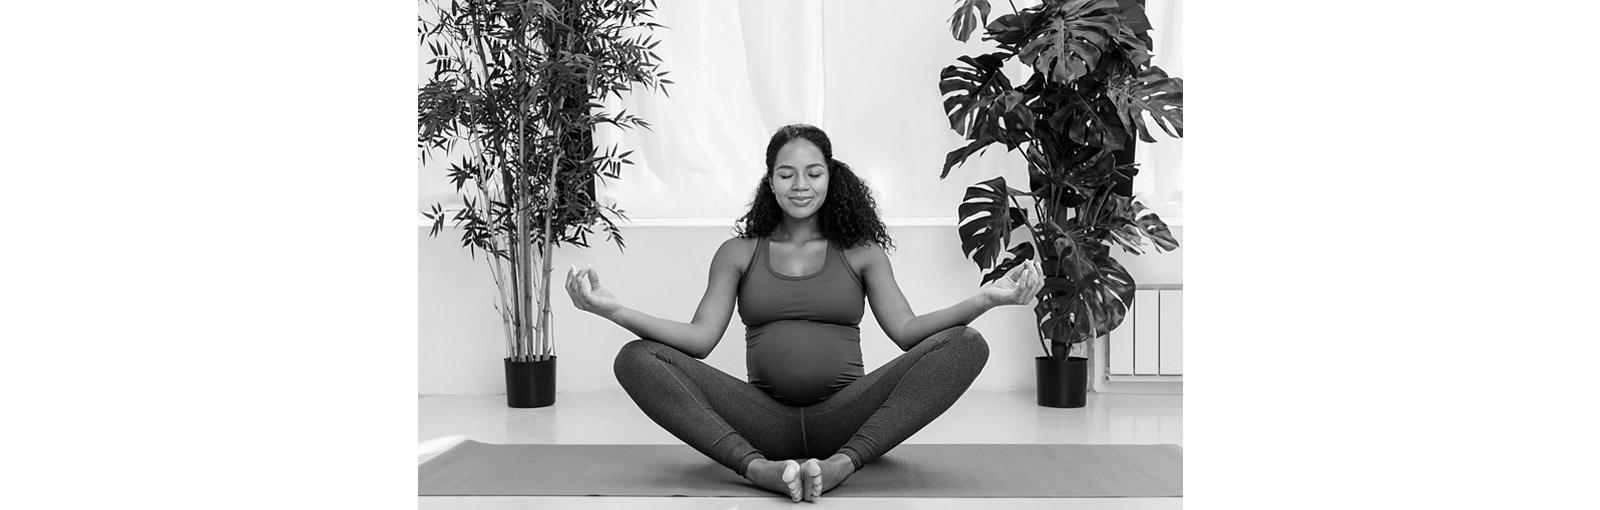 Pregnant woman indoors meditating with eyes closed in lotus pose
1085205786